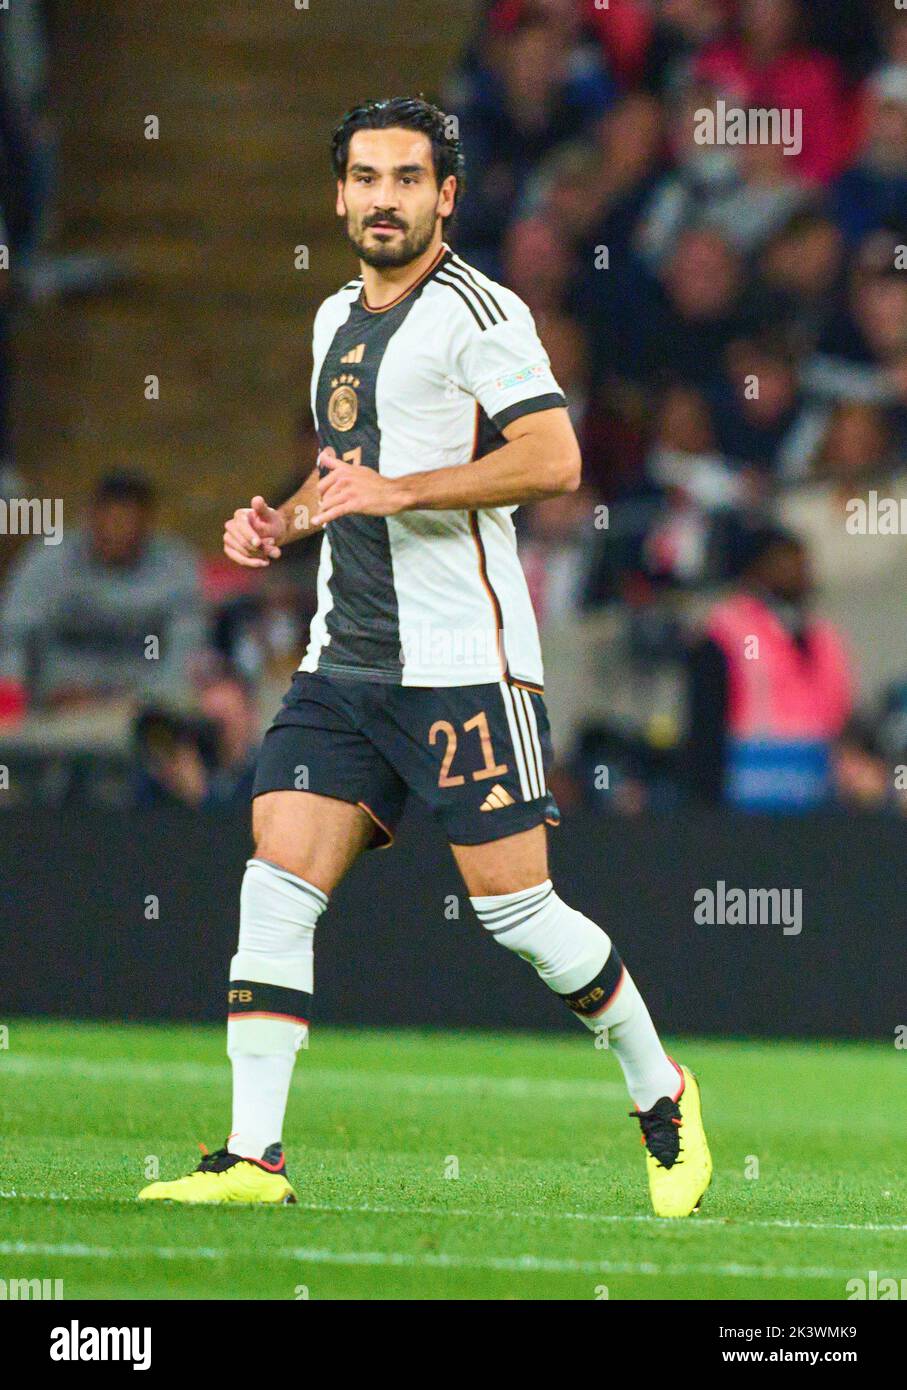 Ilkay Gündogan, DFB 21  in the UEFA Nations League 2022 match  ENGLAND - GERMANY 3-3  in Season 2022/2023 on Sept 26, 2022  in London, Great Britain.  © Peter Schatz / Alamy Live News Stock Photo